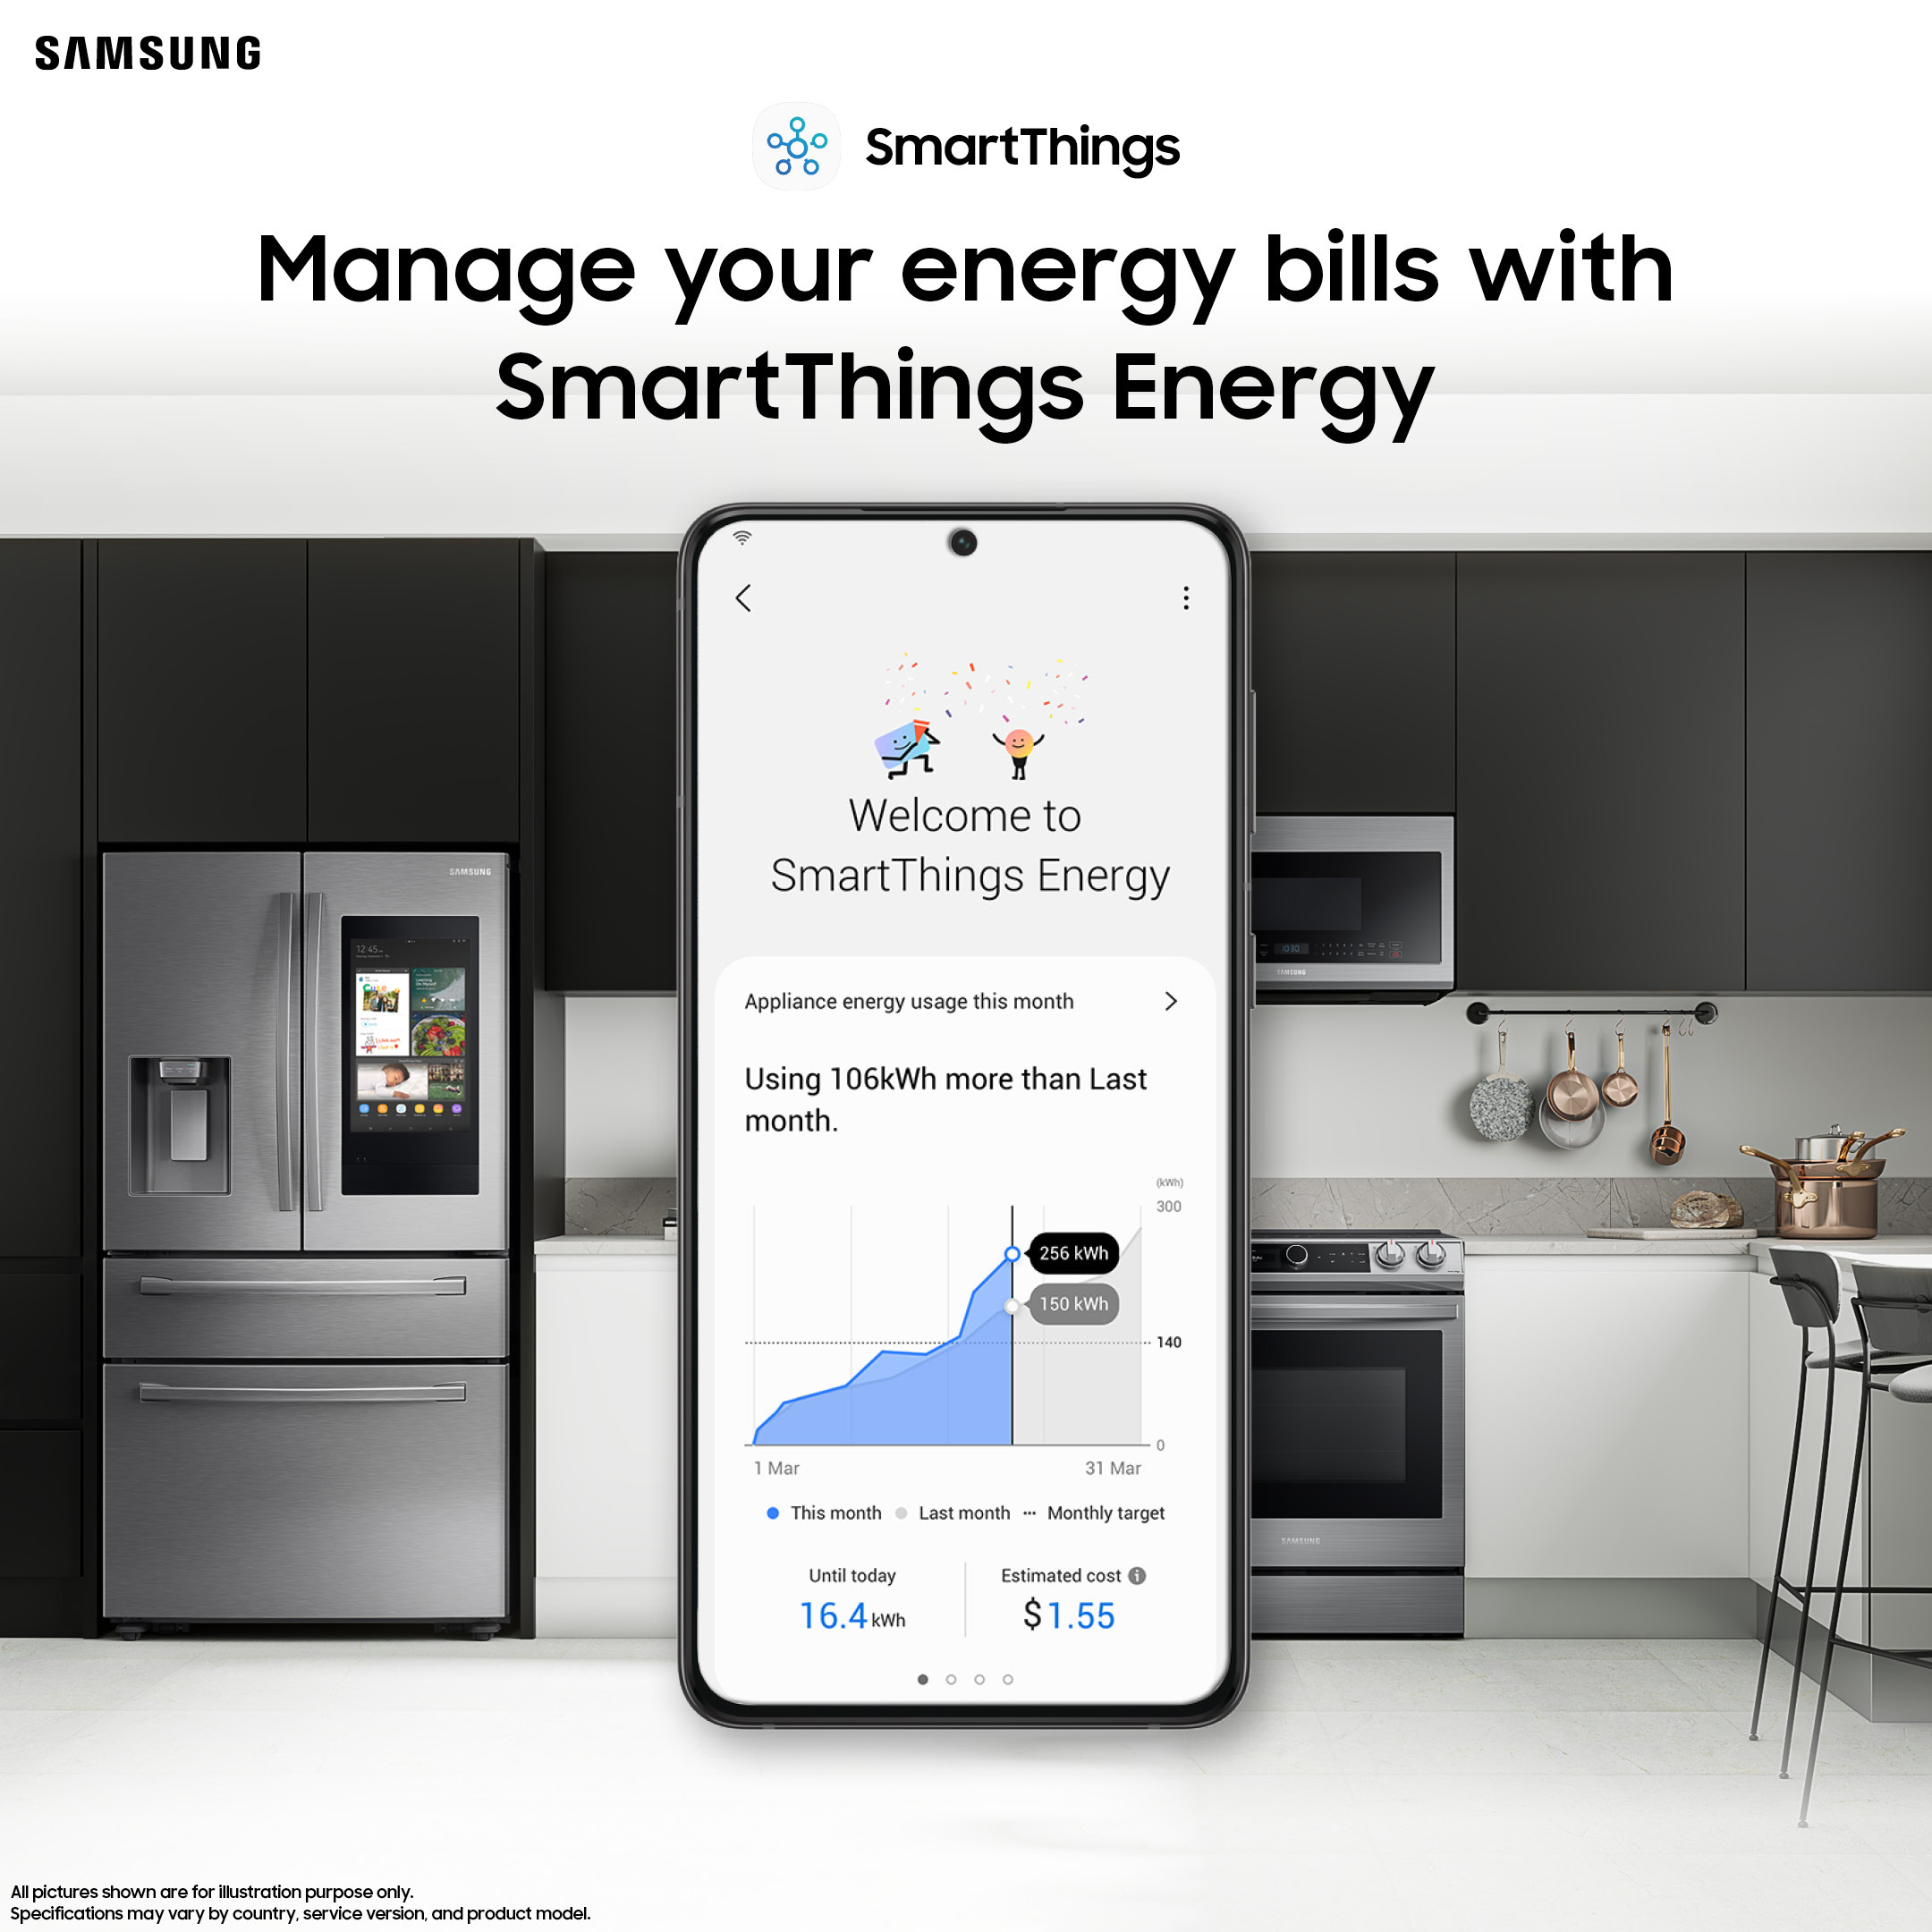 Eco-friendly smart home solutions pave way for a greener future